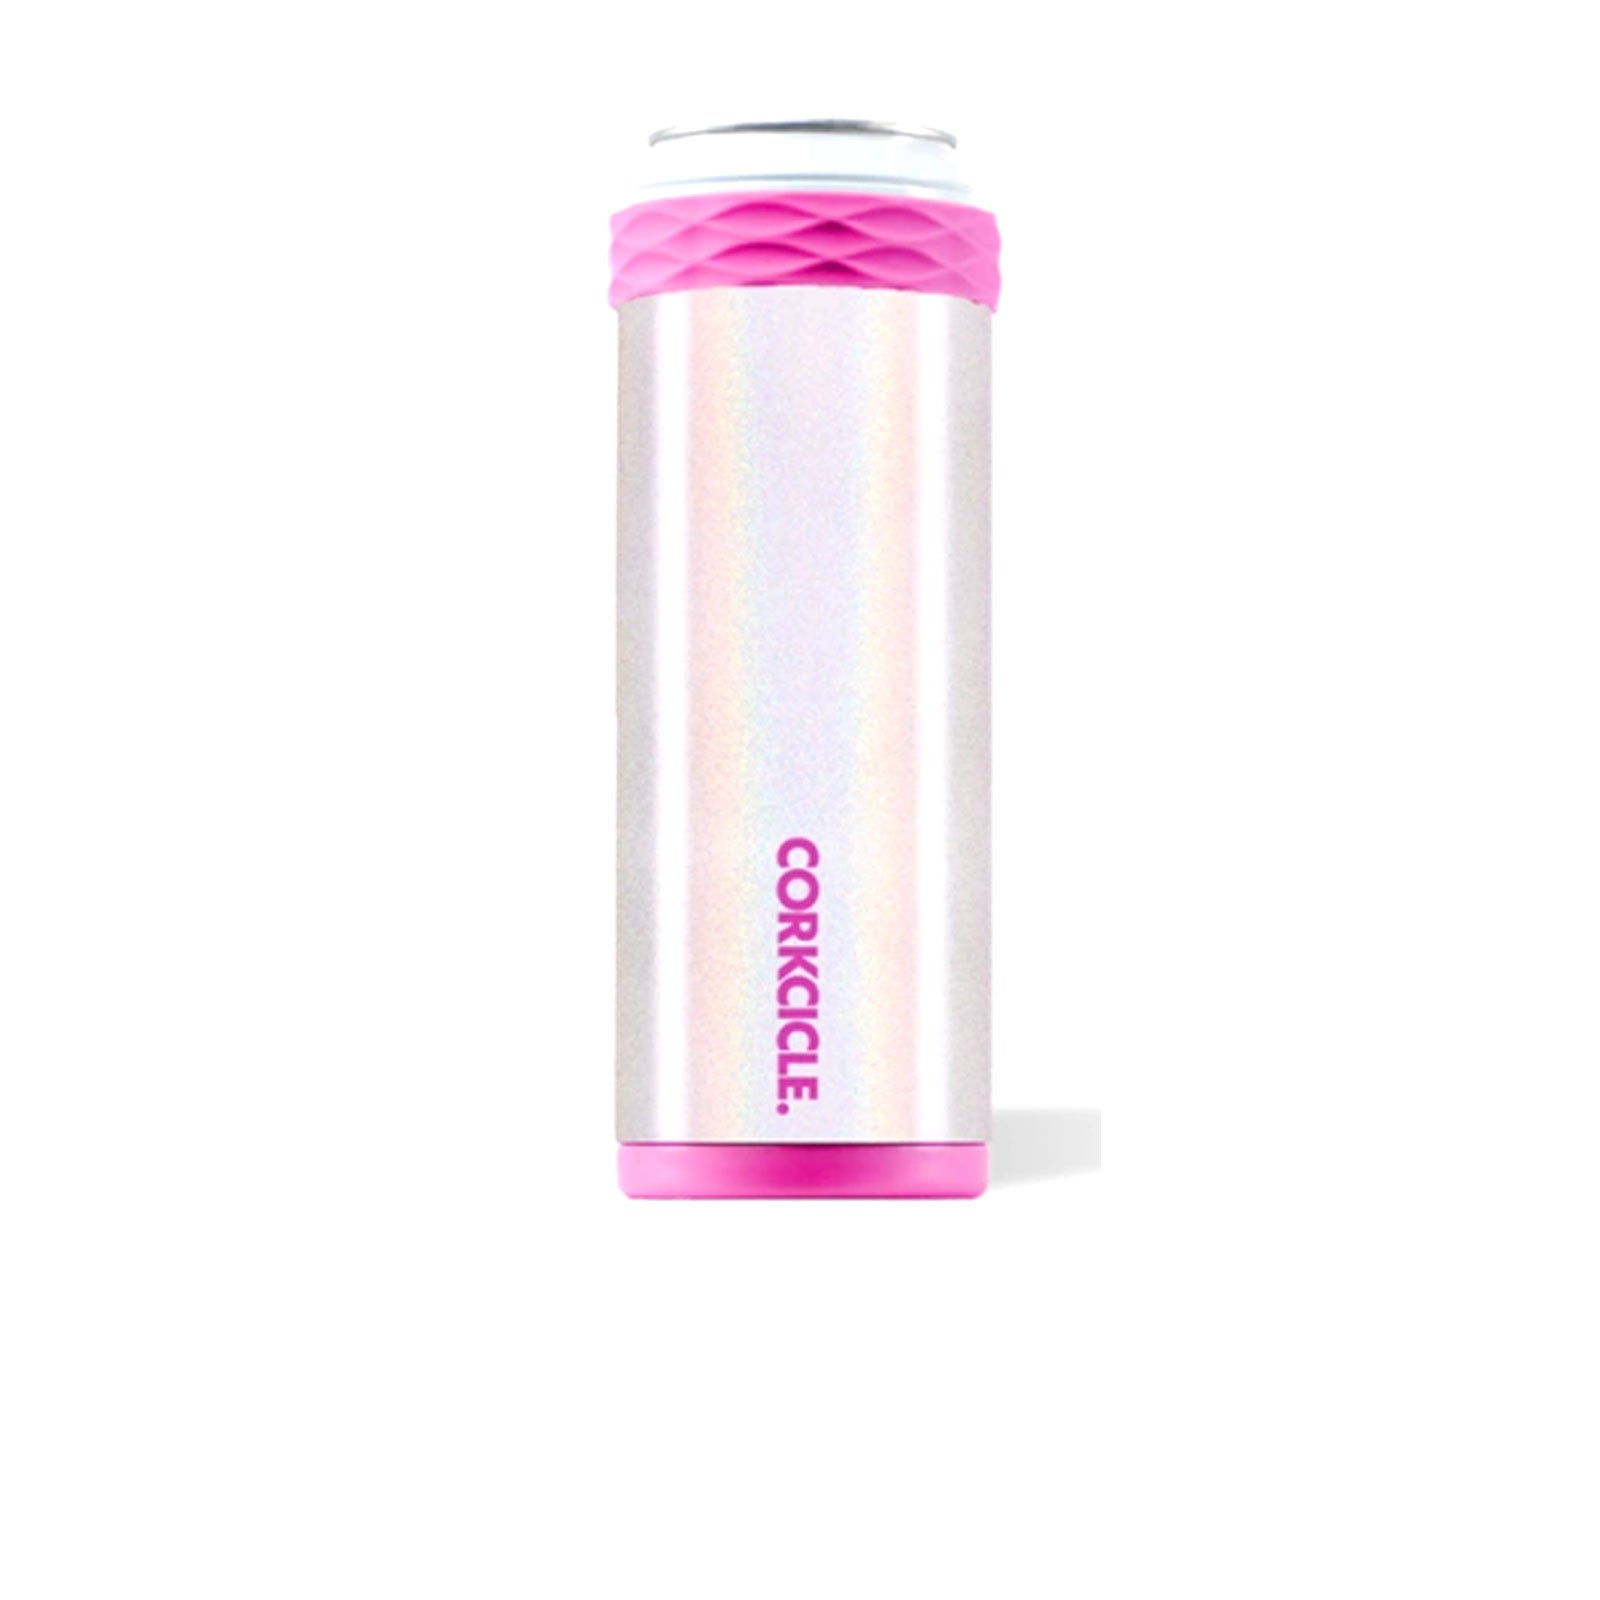 Corkcicle Artican Slim Can/Bottle Cooler - Unicorn Magic Accessories - Drinkware - Accessories - The Heel Shoe Fitters